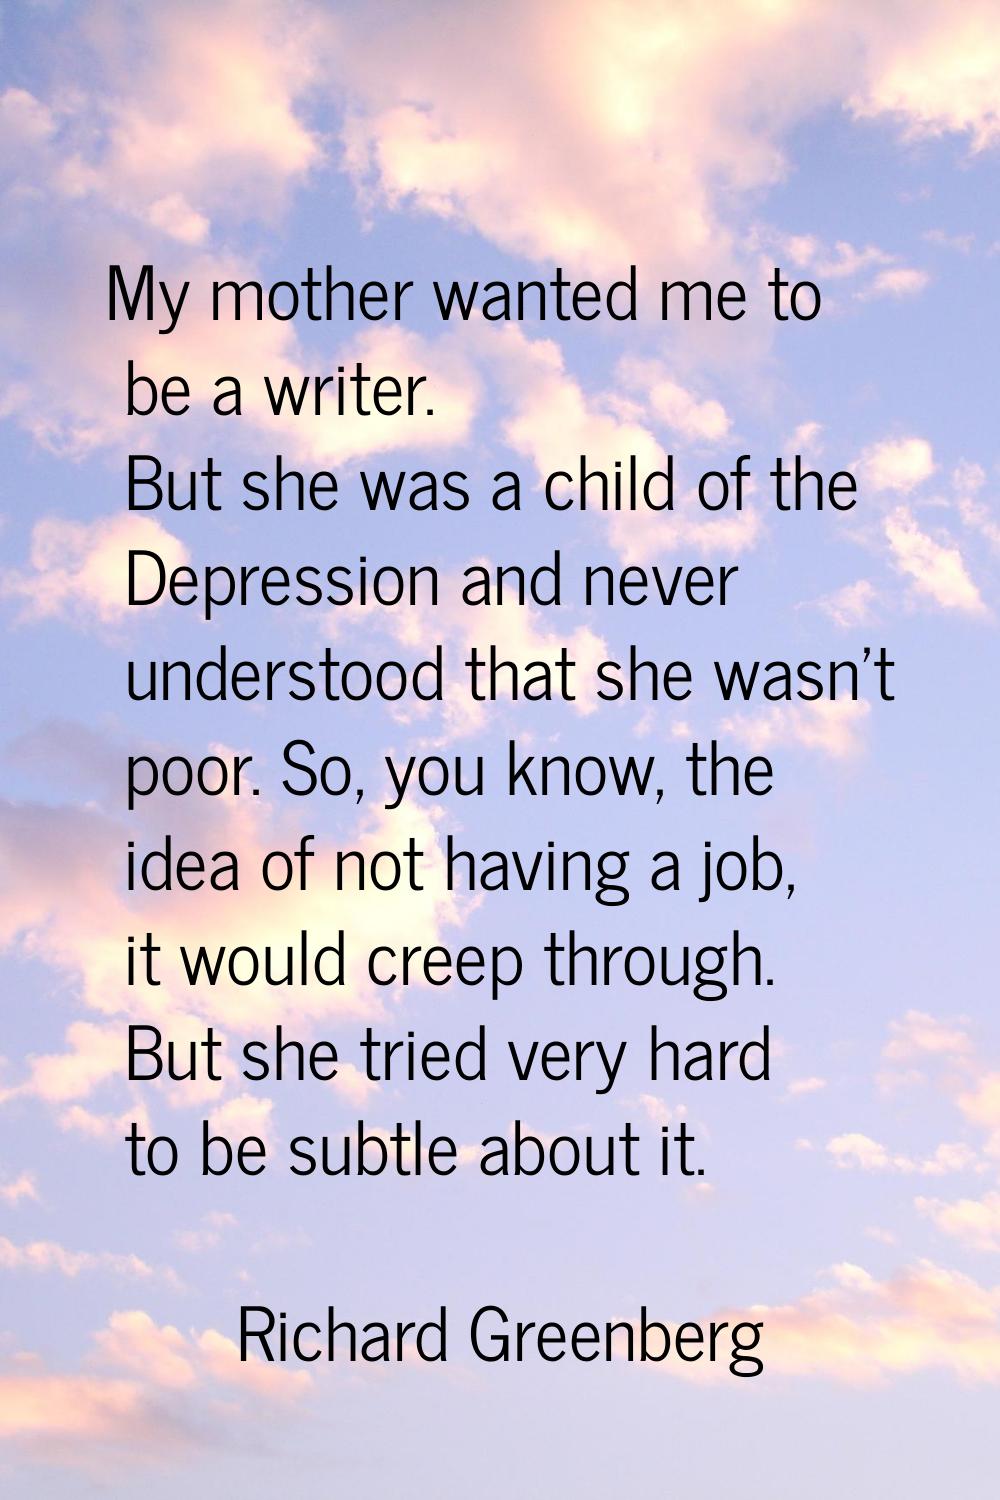 My mother wanted me to be a writer. But she was a child of the Depression and never understood that